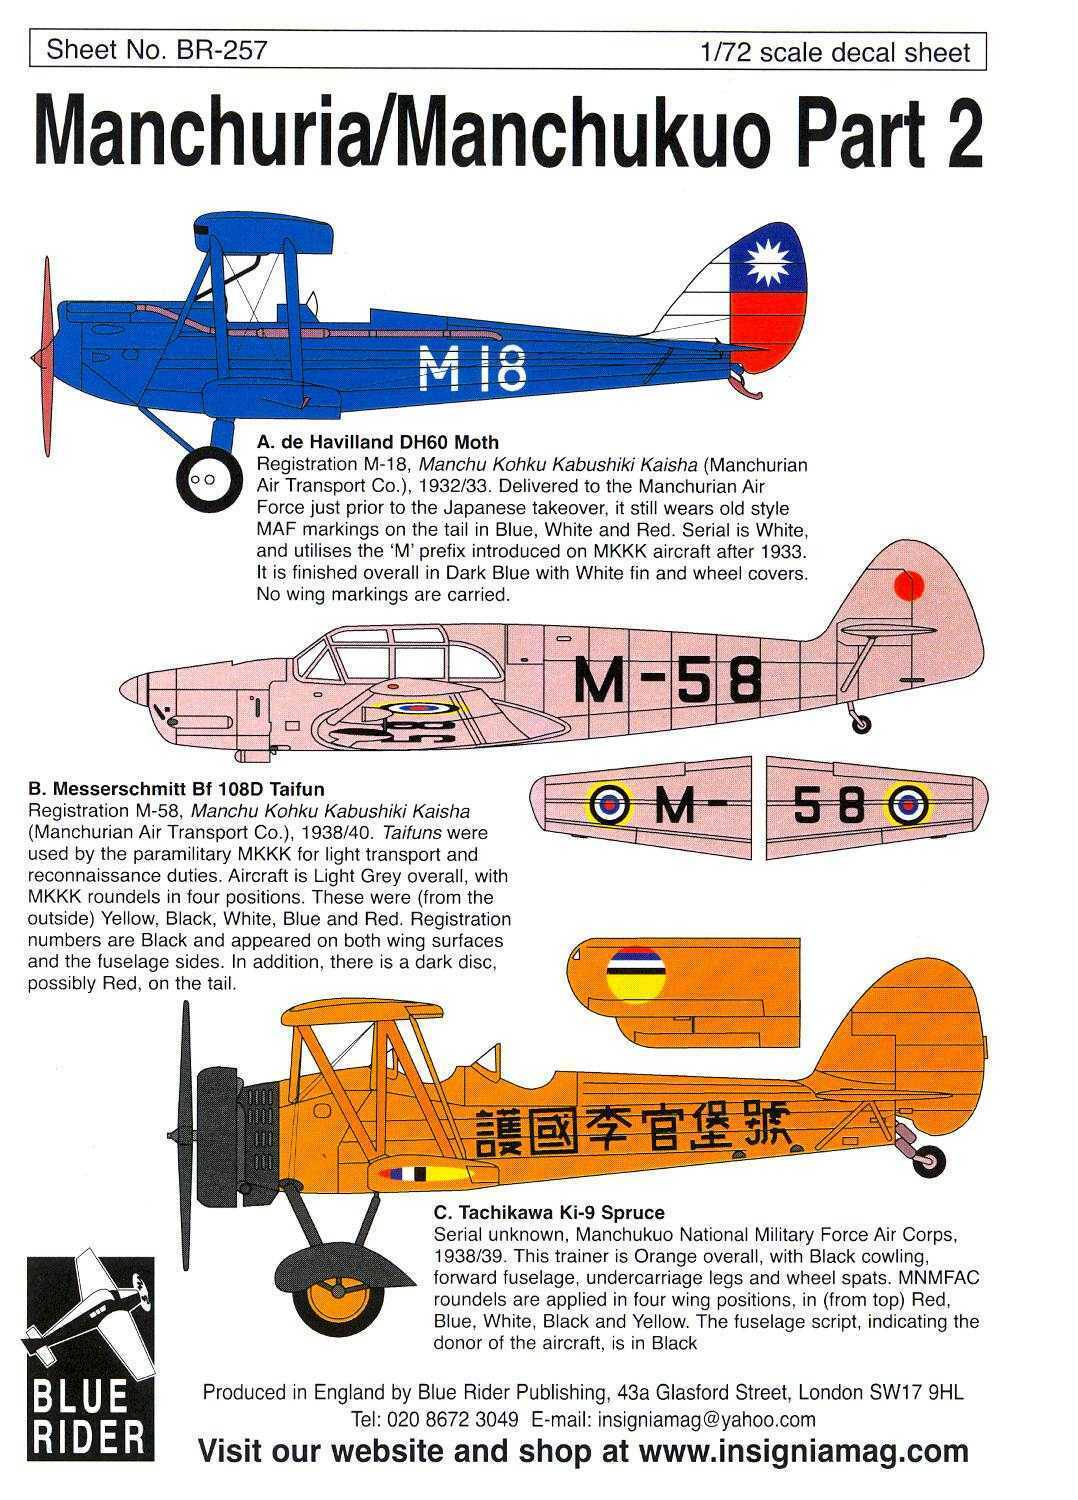 1706462482 311 Manchurian WWII Air Force I